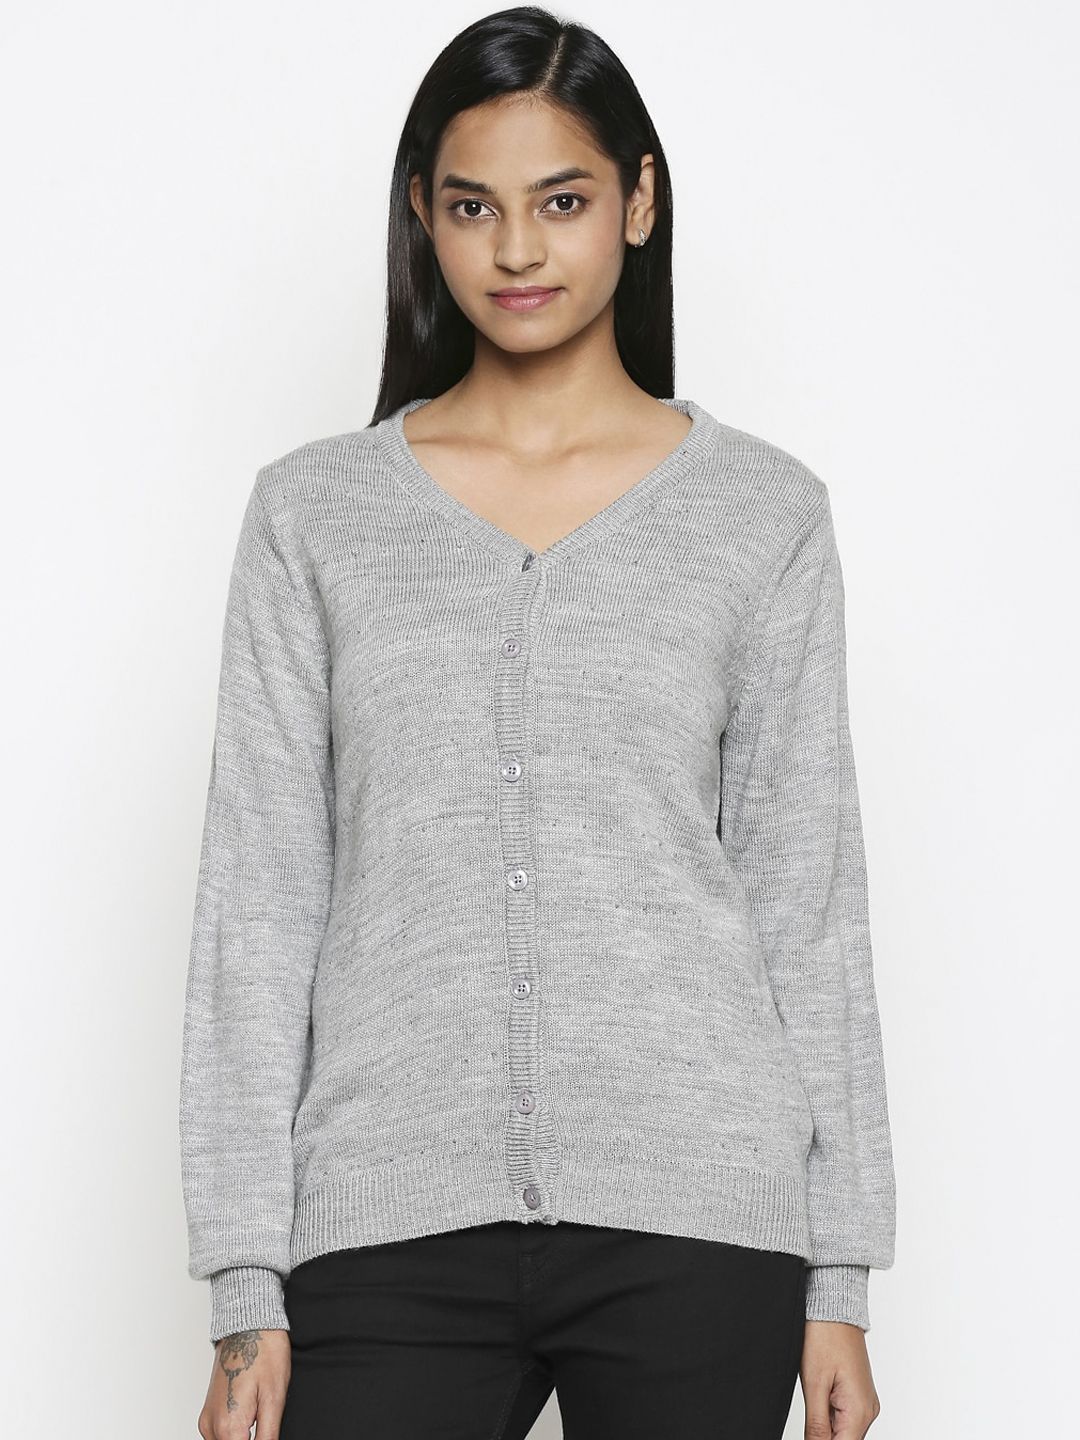 RANGMANCH BY PANTALOONS Women Grey Solid Cardigan Sweater Price in India